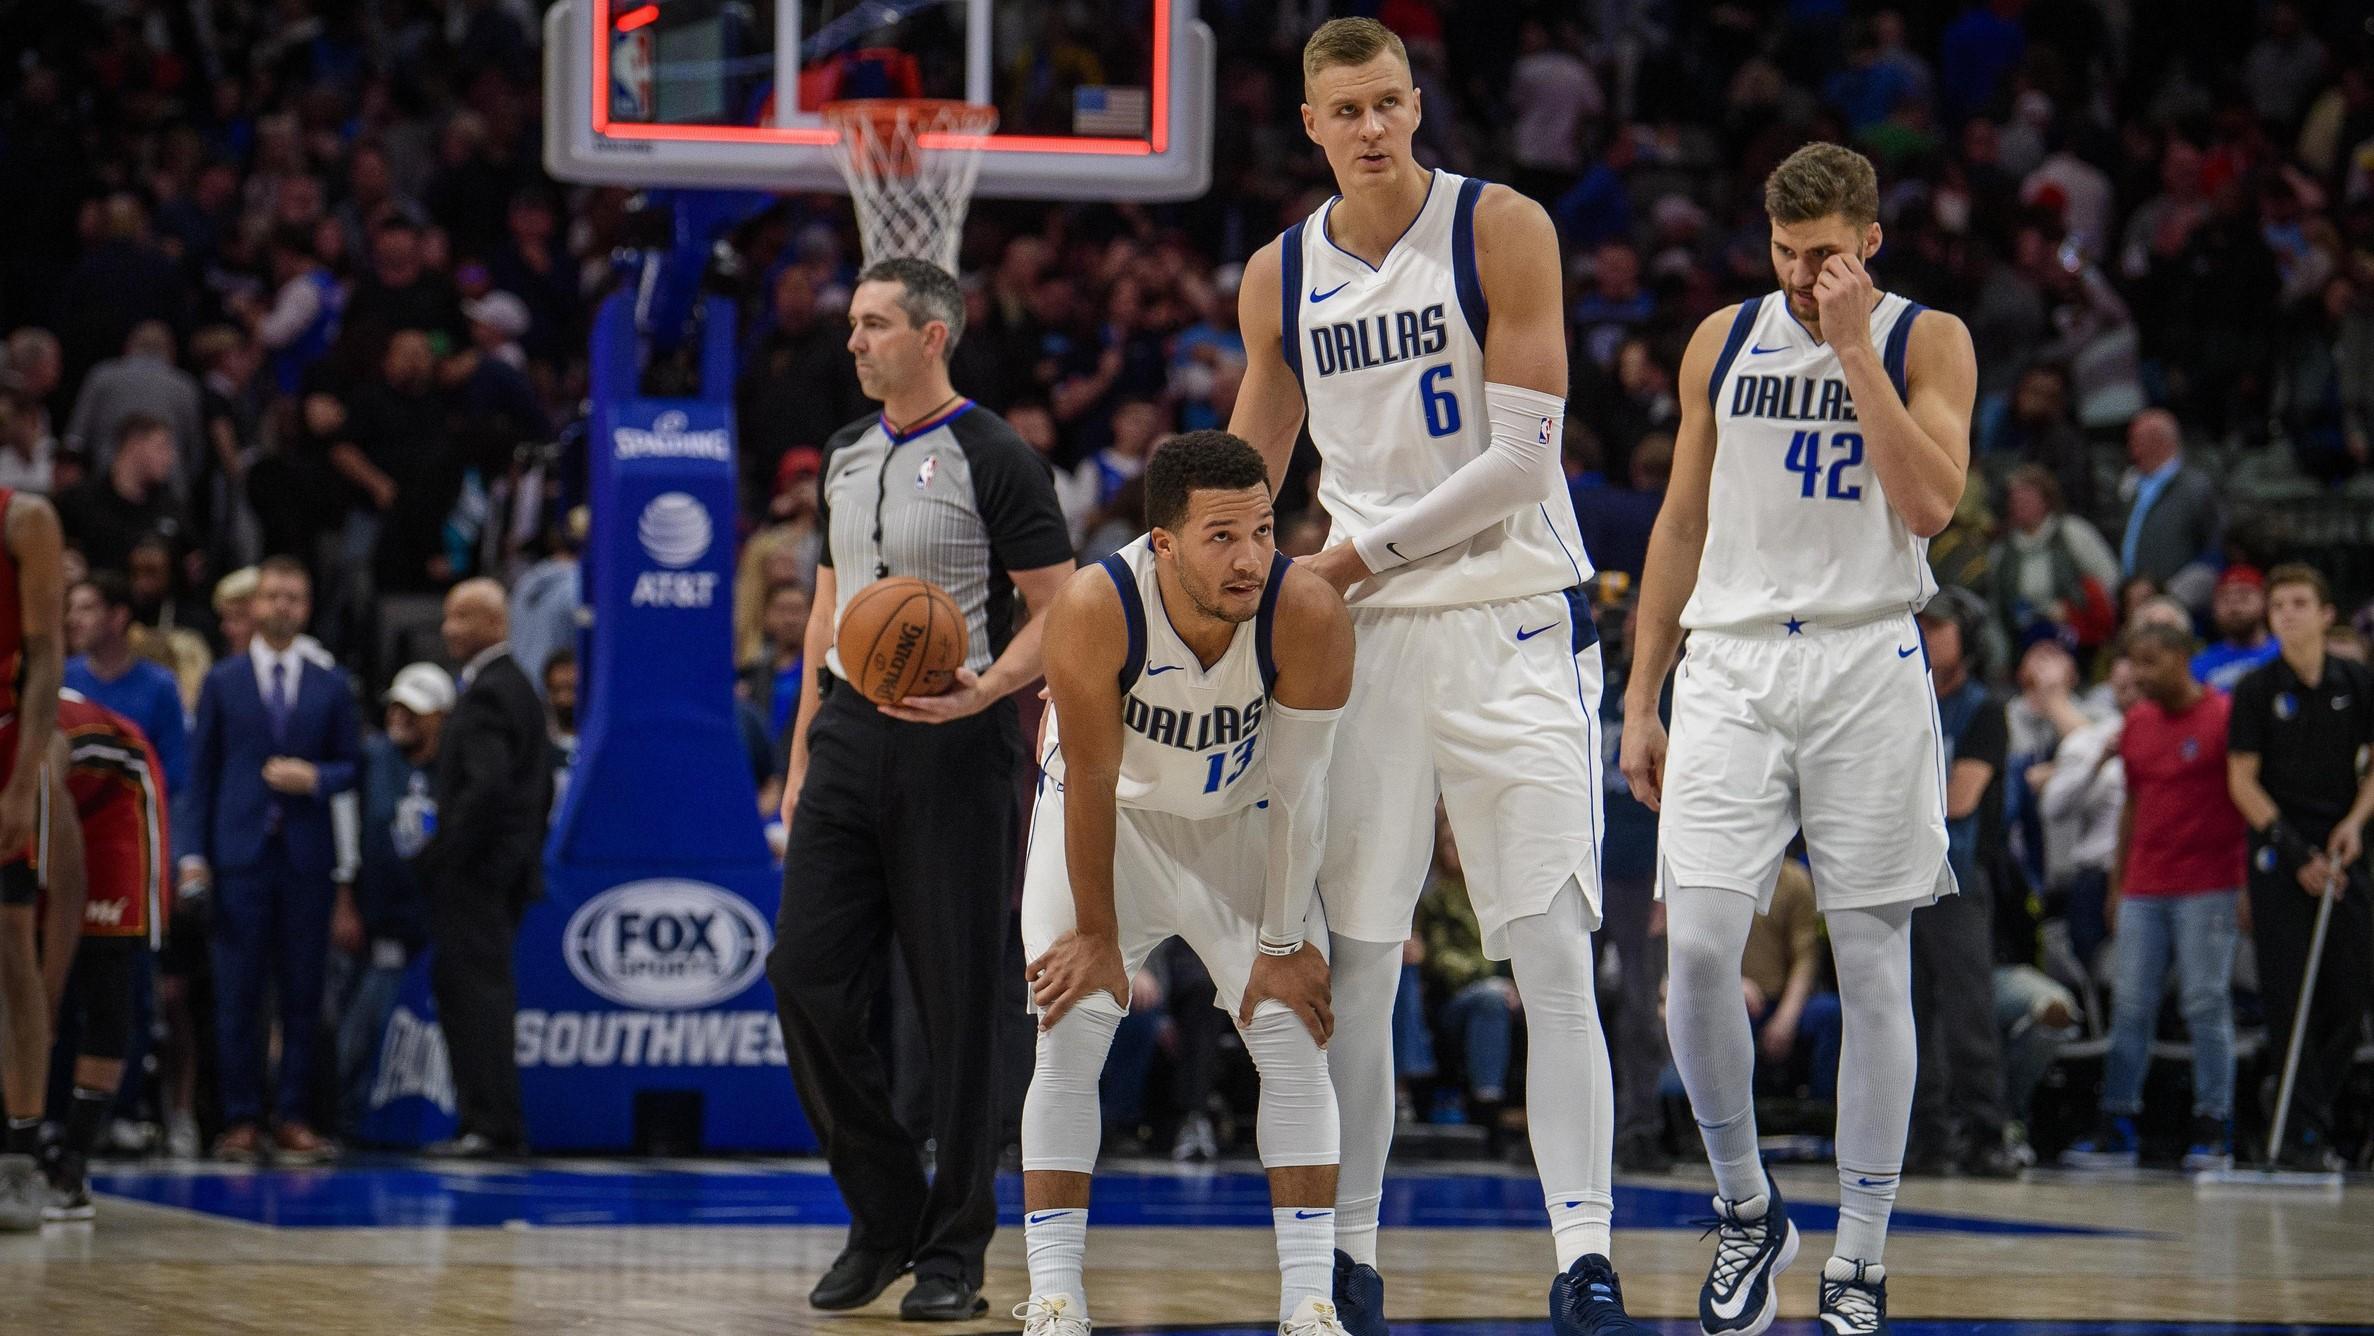 Dec 14, 2019; Dallas, TX, USA; Dallas Mavericks forward Kristaps Porzingis (6) consoles guard Jalen Brunson (13) after Brunson misses a shot to tie the game against the Miami Heat during overtime at the American Airlines Center. / Jerome Miron-USA TODAY Sports